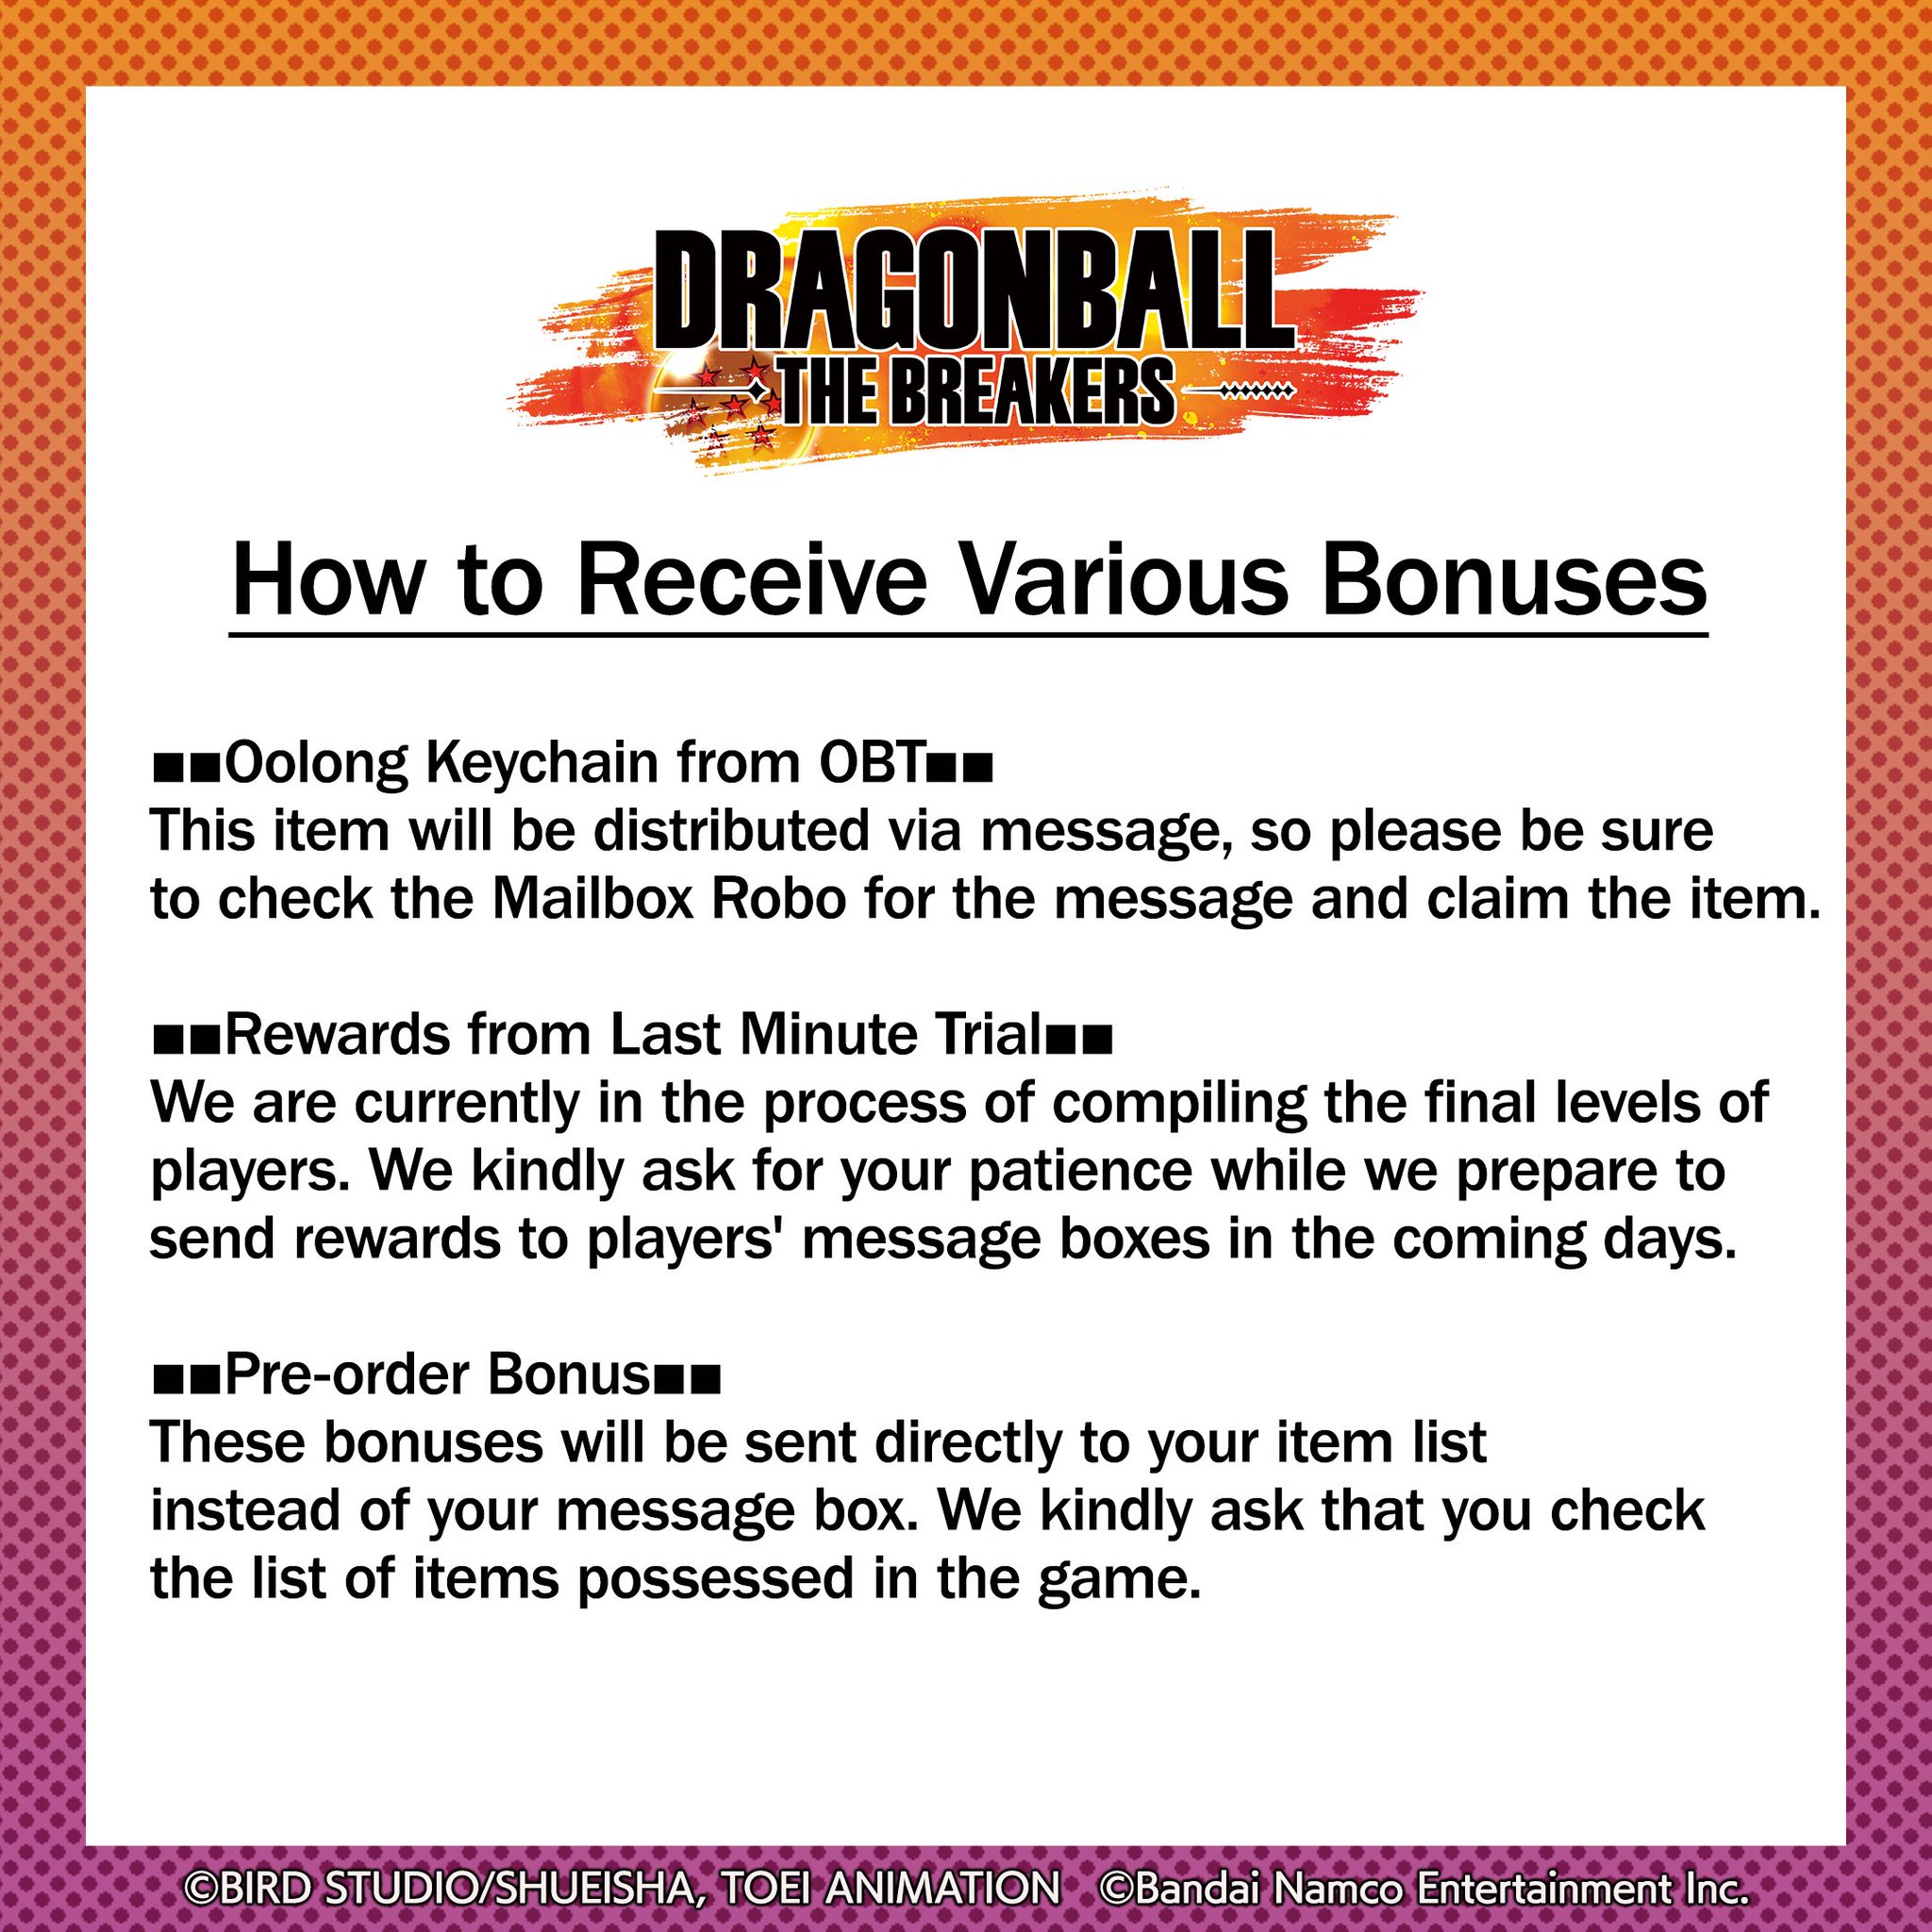 Dragon Ball: The Breakers on X: Item Code Distribution #3 Here is the code  for the #DBTB item for week 3! Enter the following code into the game to  receive this week's